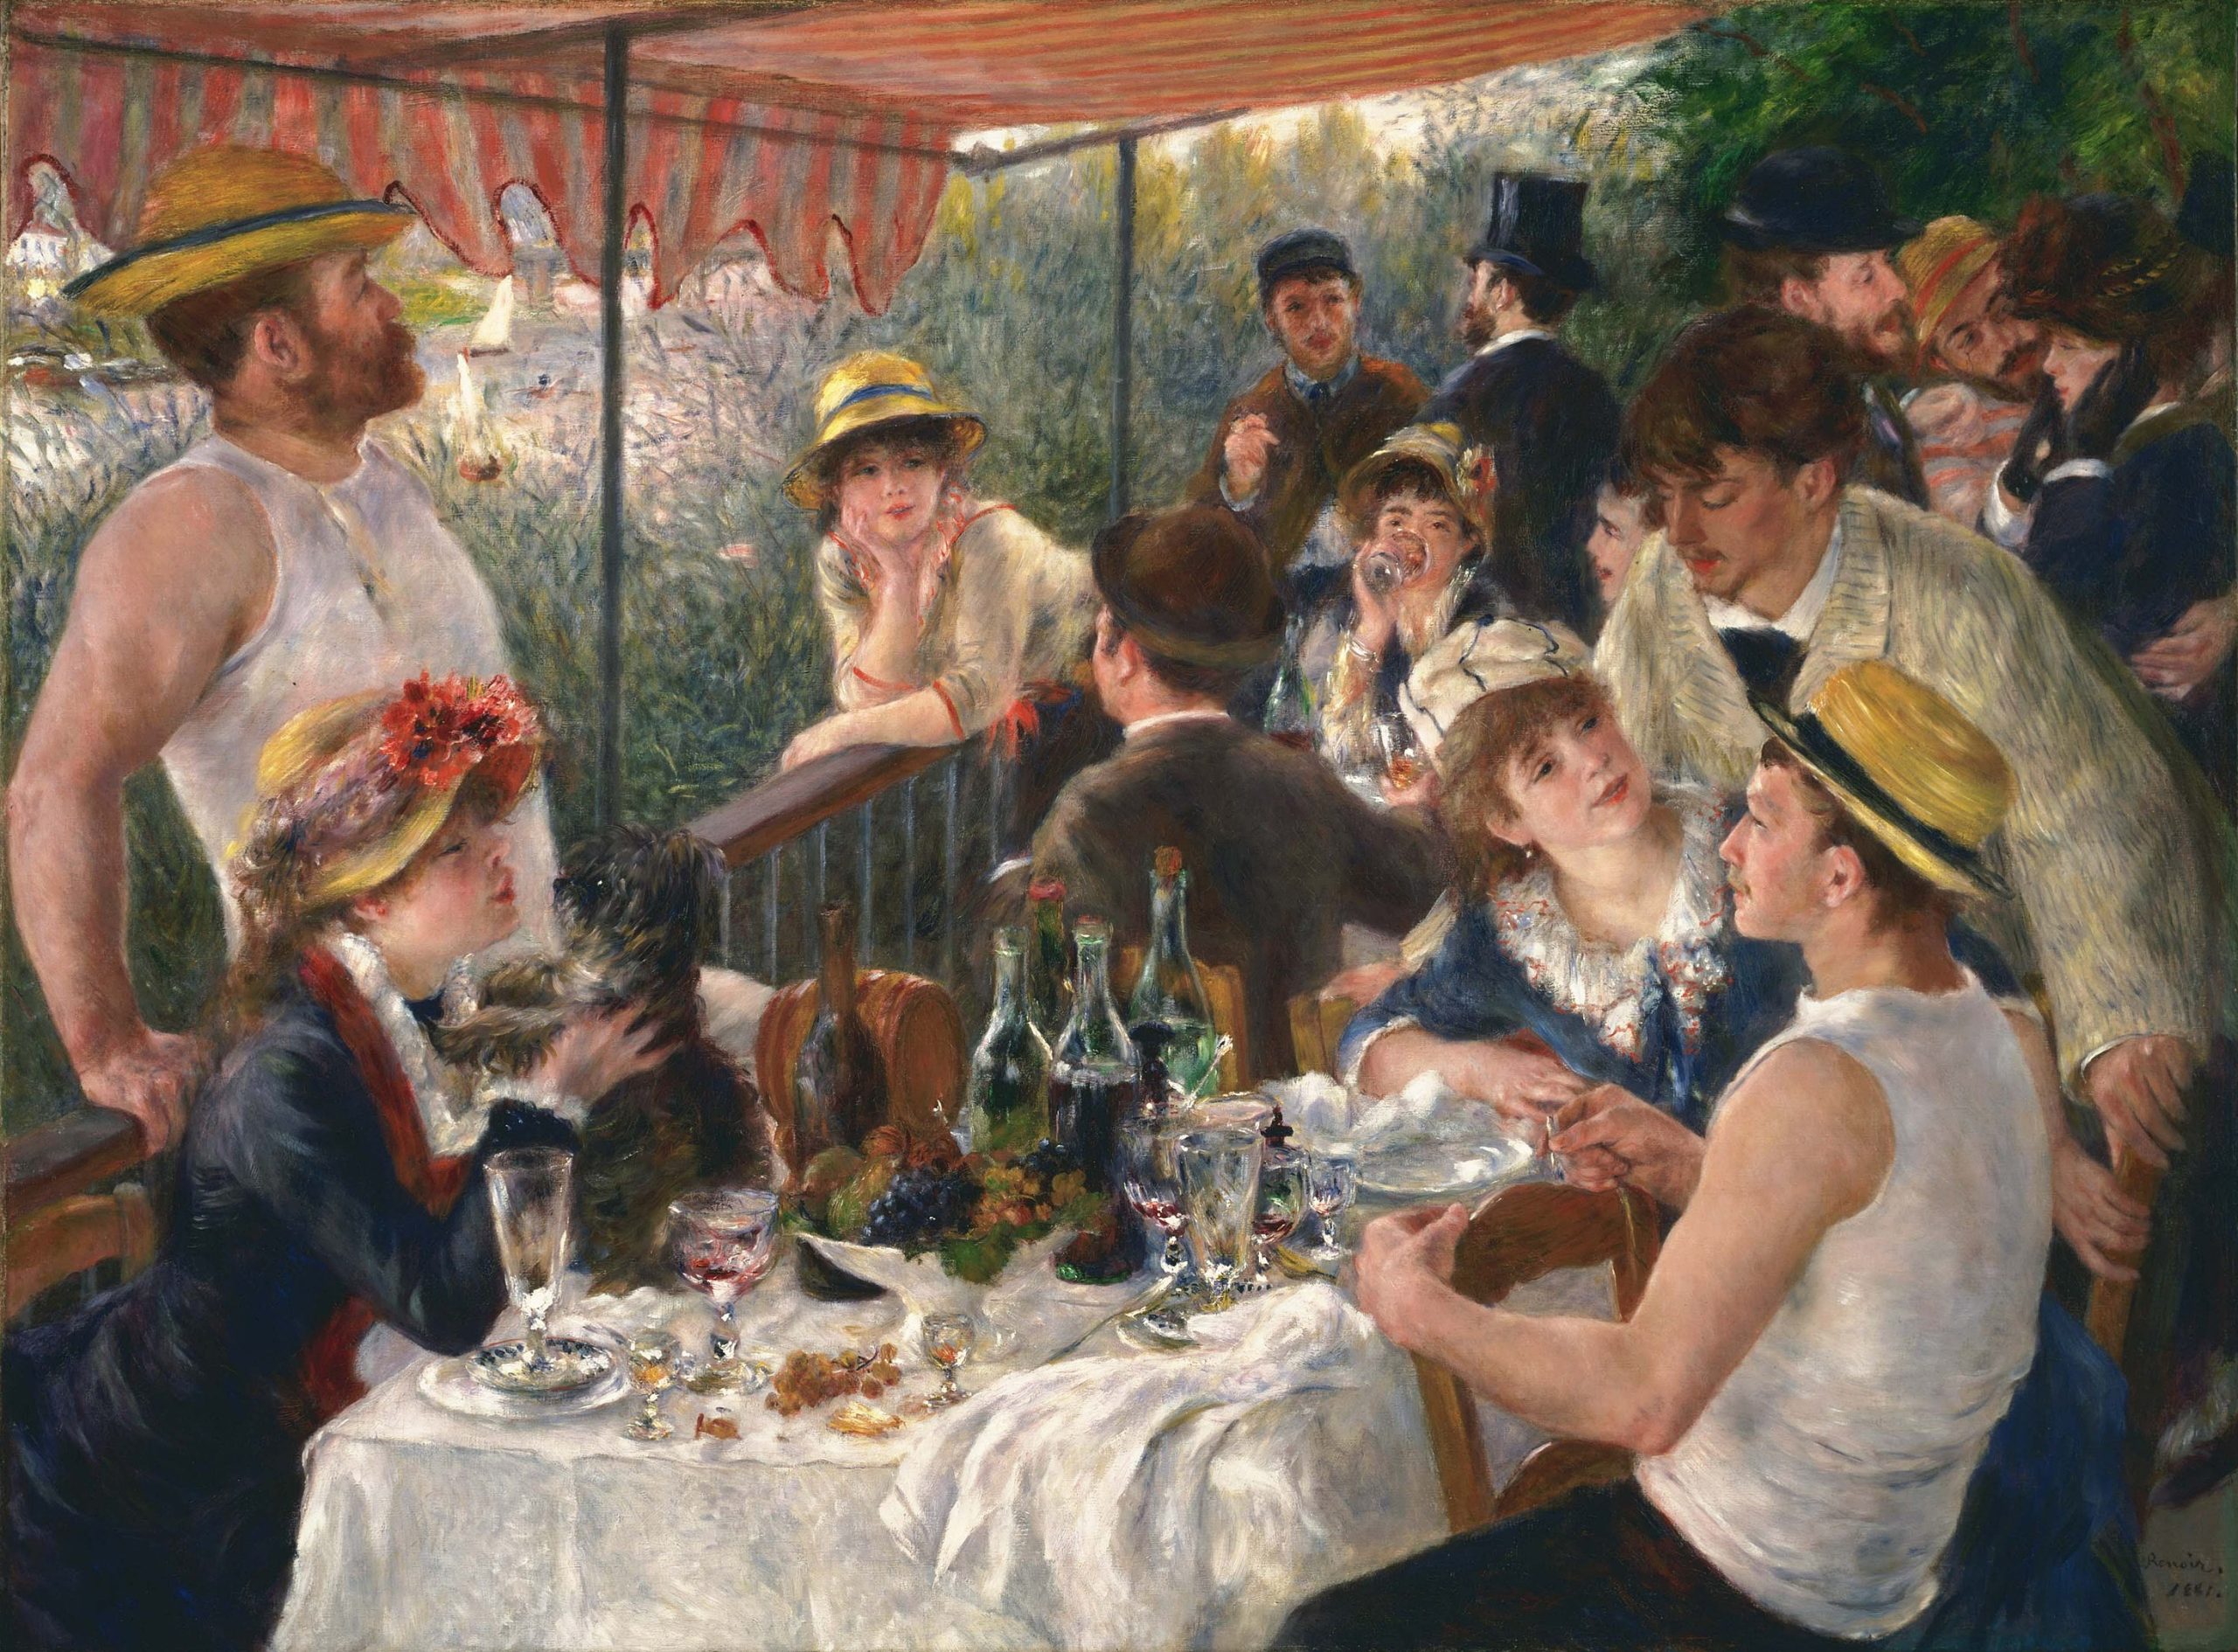 Men and women gathered around a table outdoors for lunch